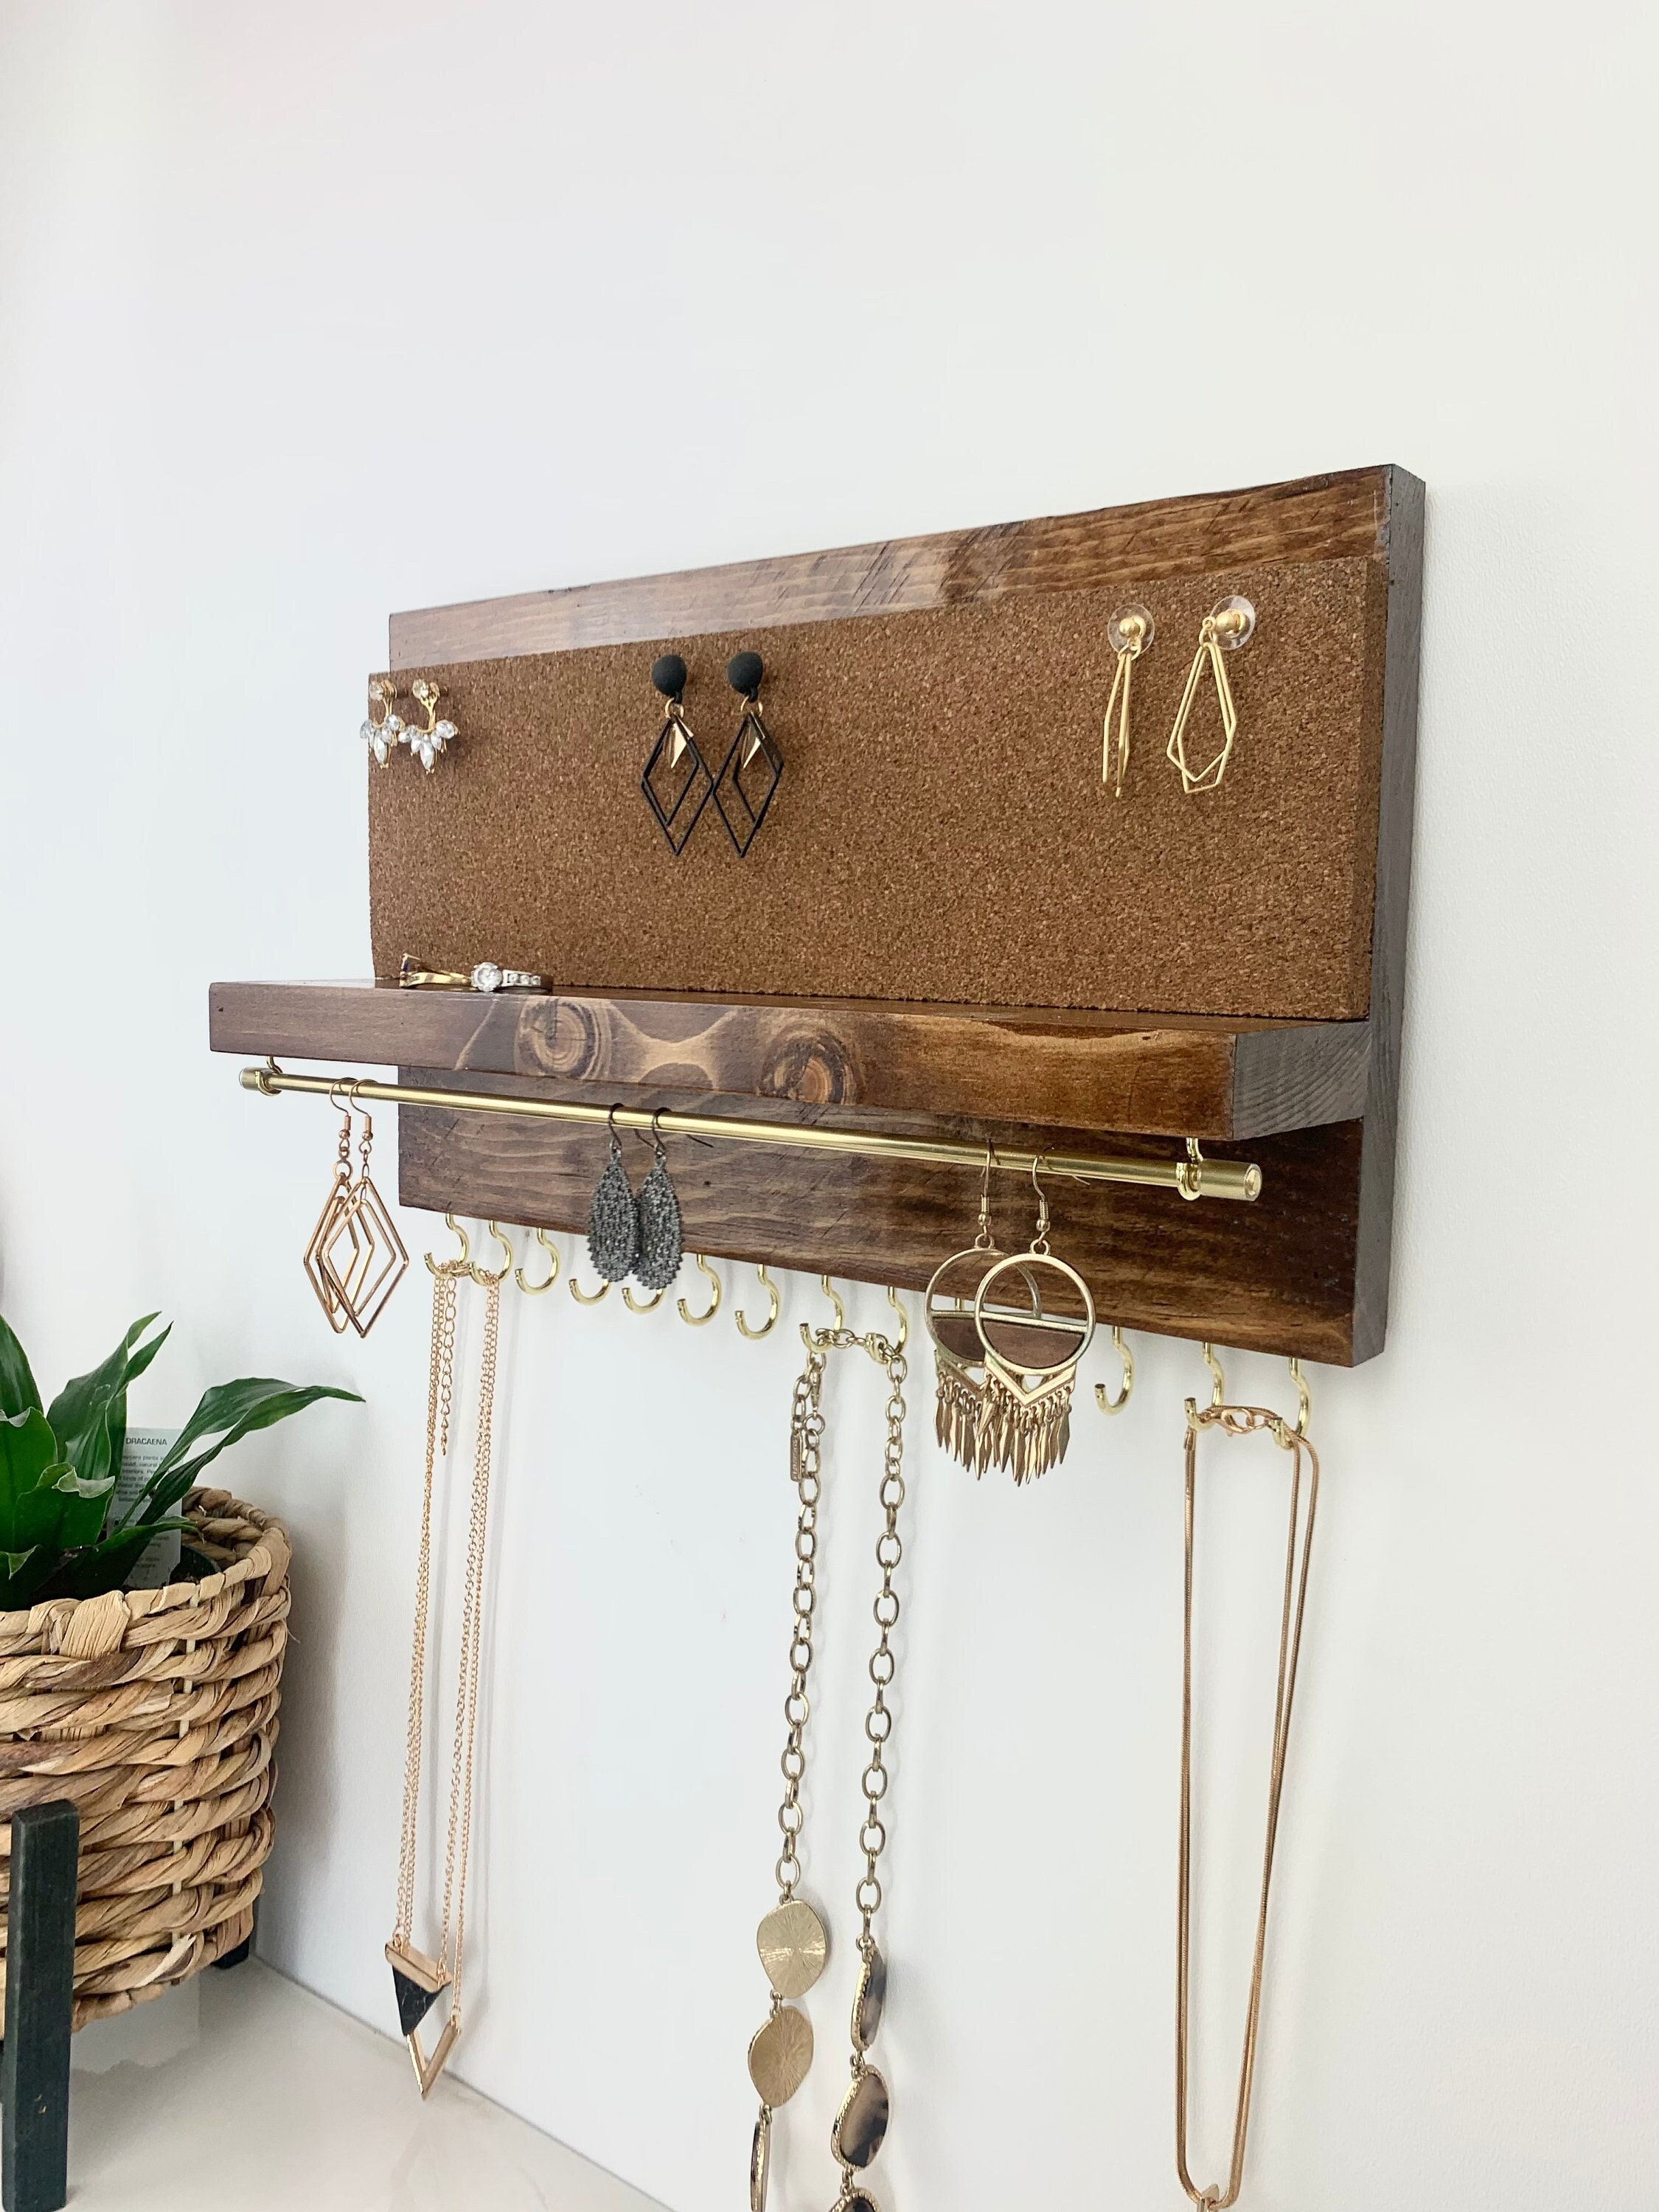 Earring Holders and Jewelry Organizers - Earring Holder Gallery